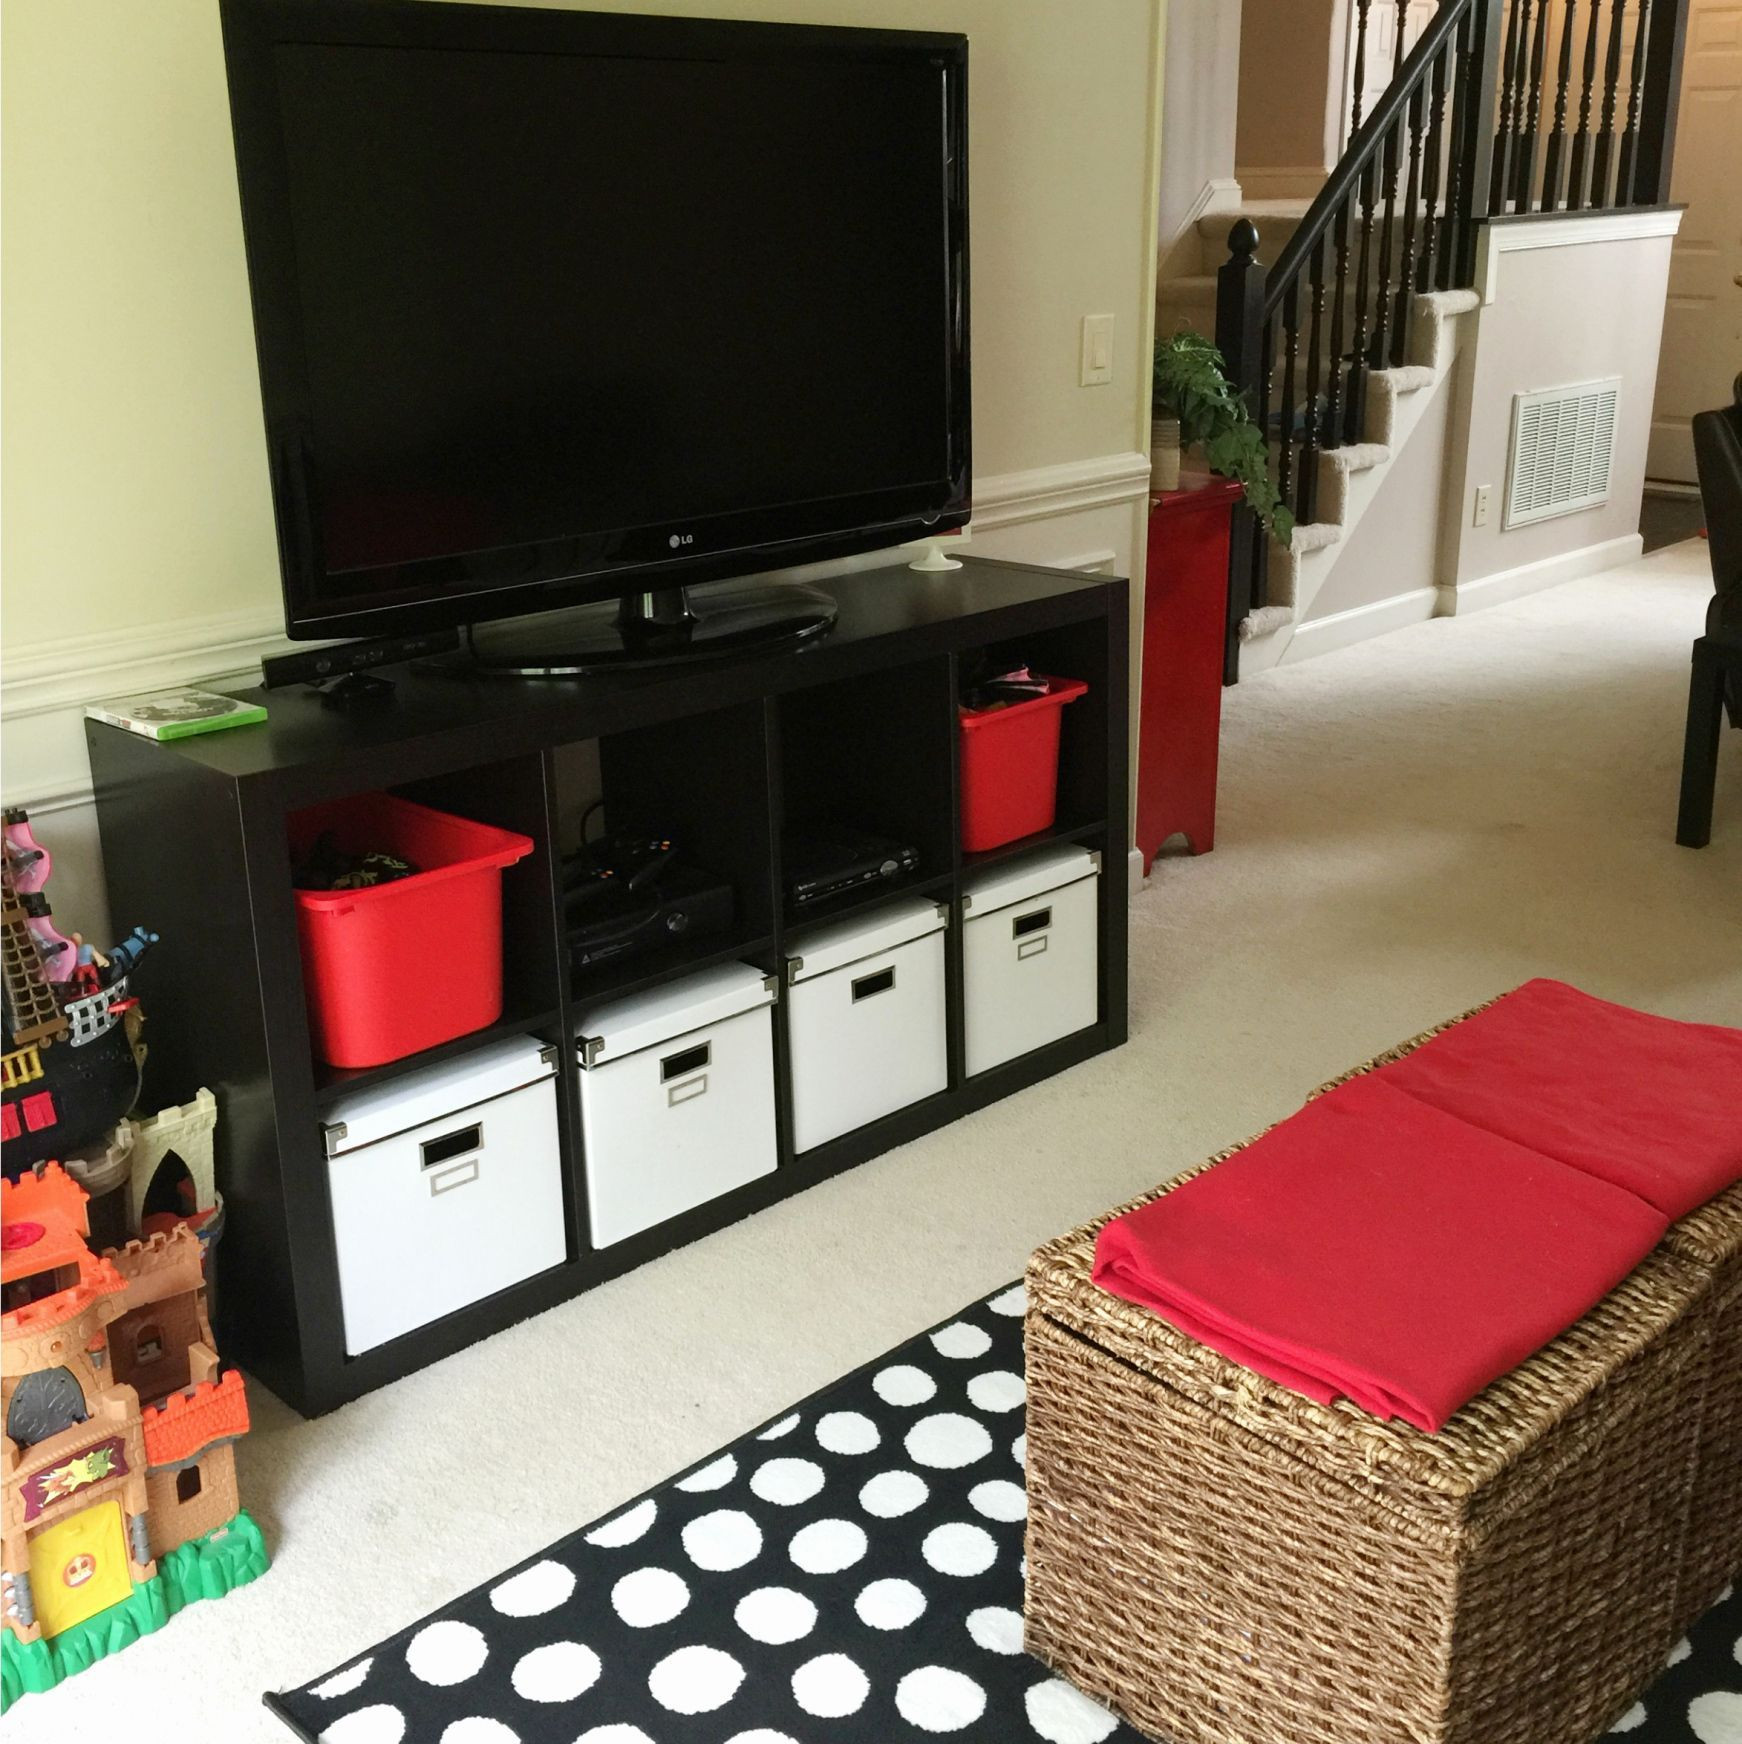 Tv Stands For Kids Room
 The top 23 Ideas About Kids Room Tv Stands Home Family